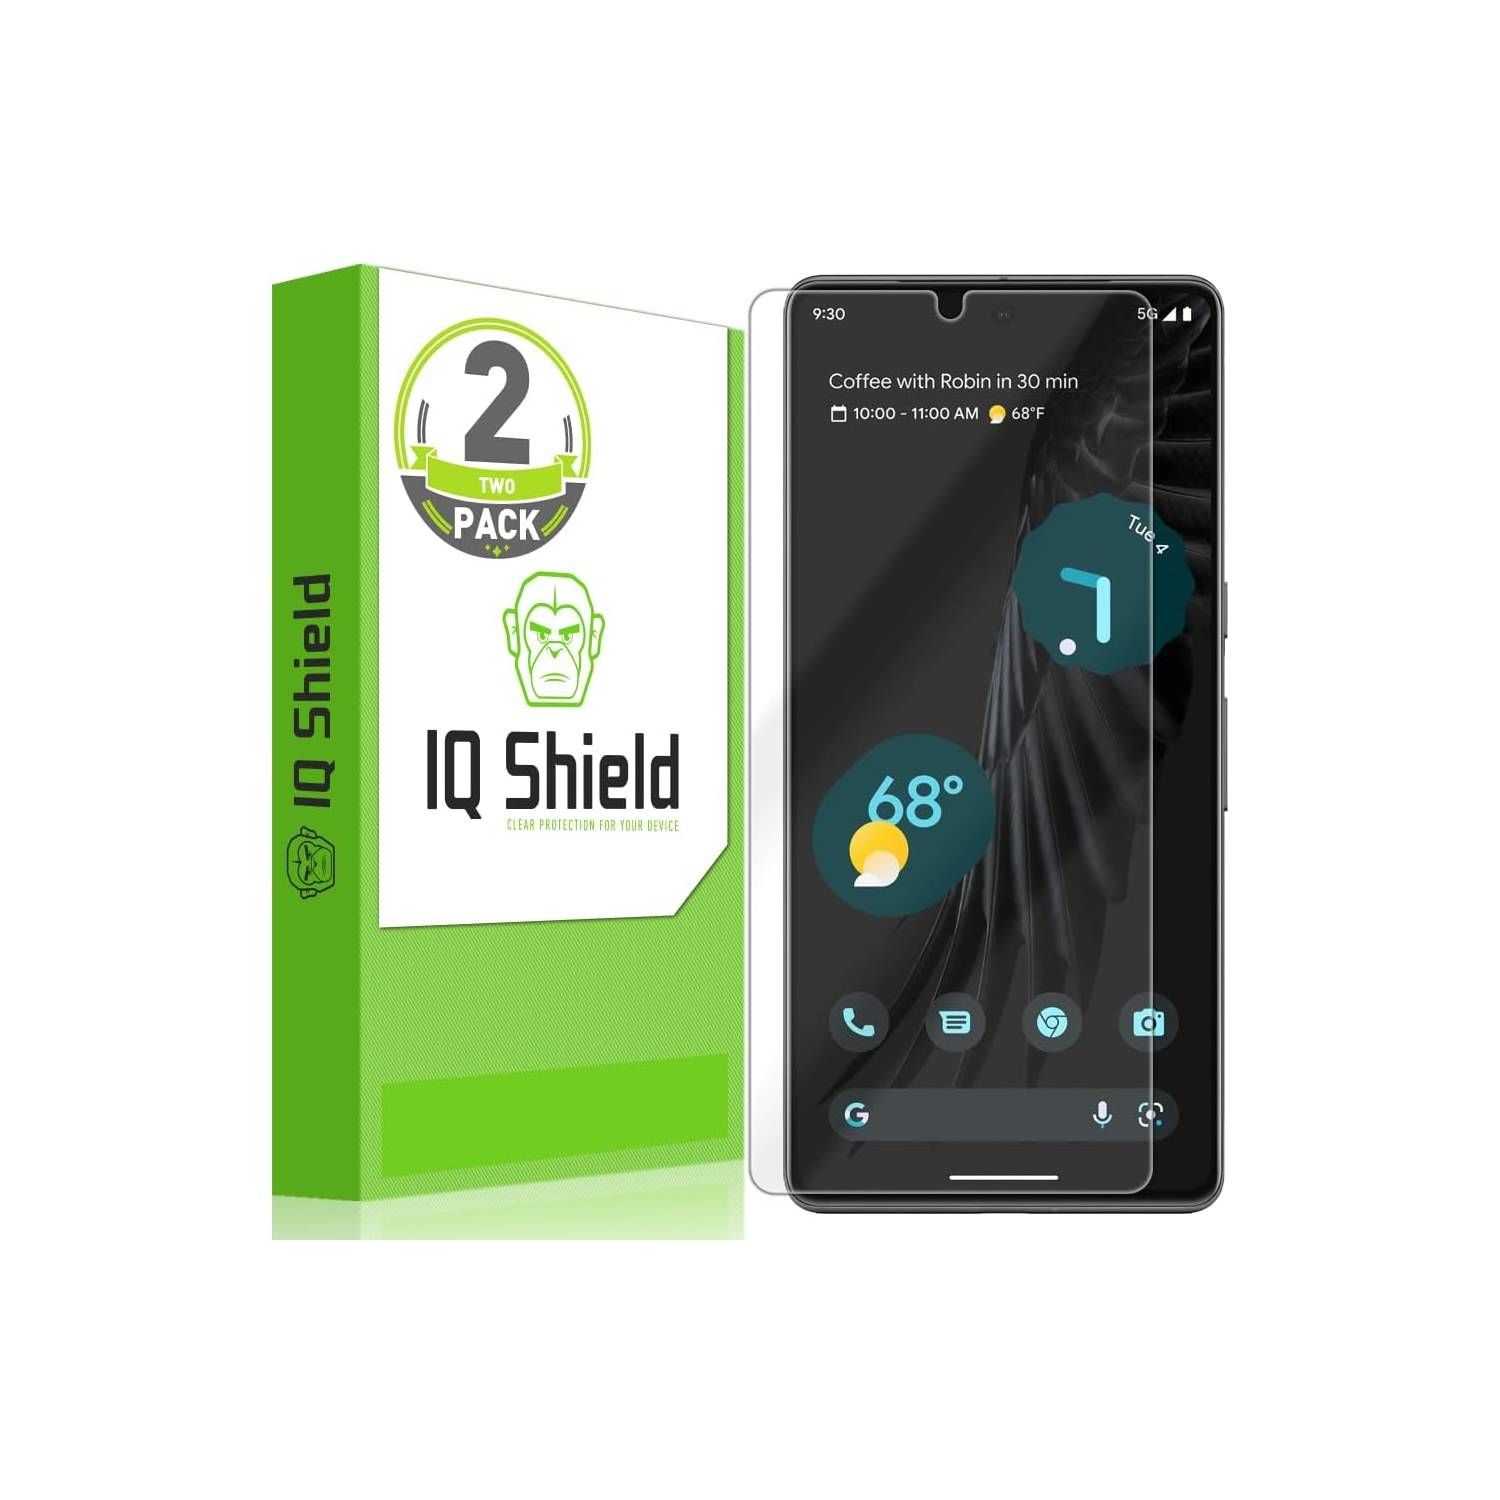 Case-Mate FlexiShield Screen Protector for Pixel 7a - Google Store